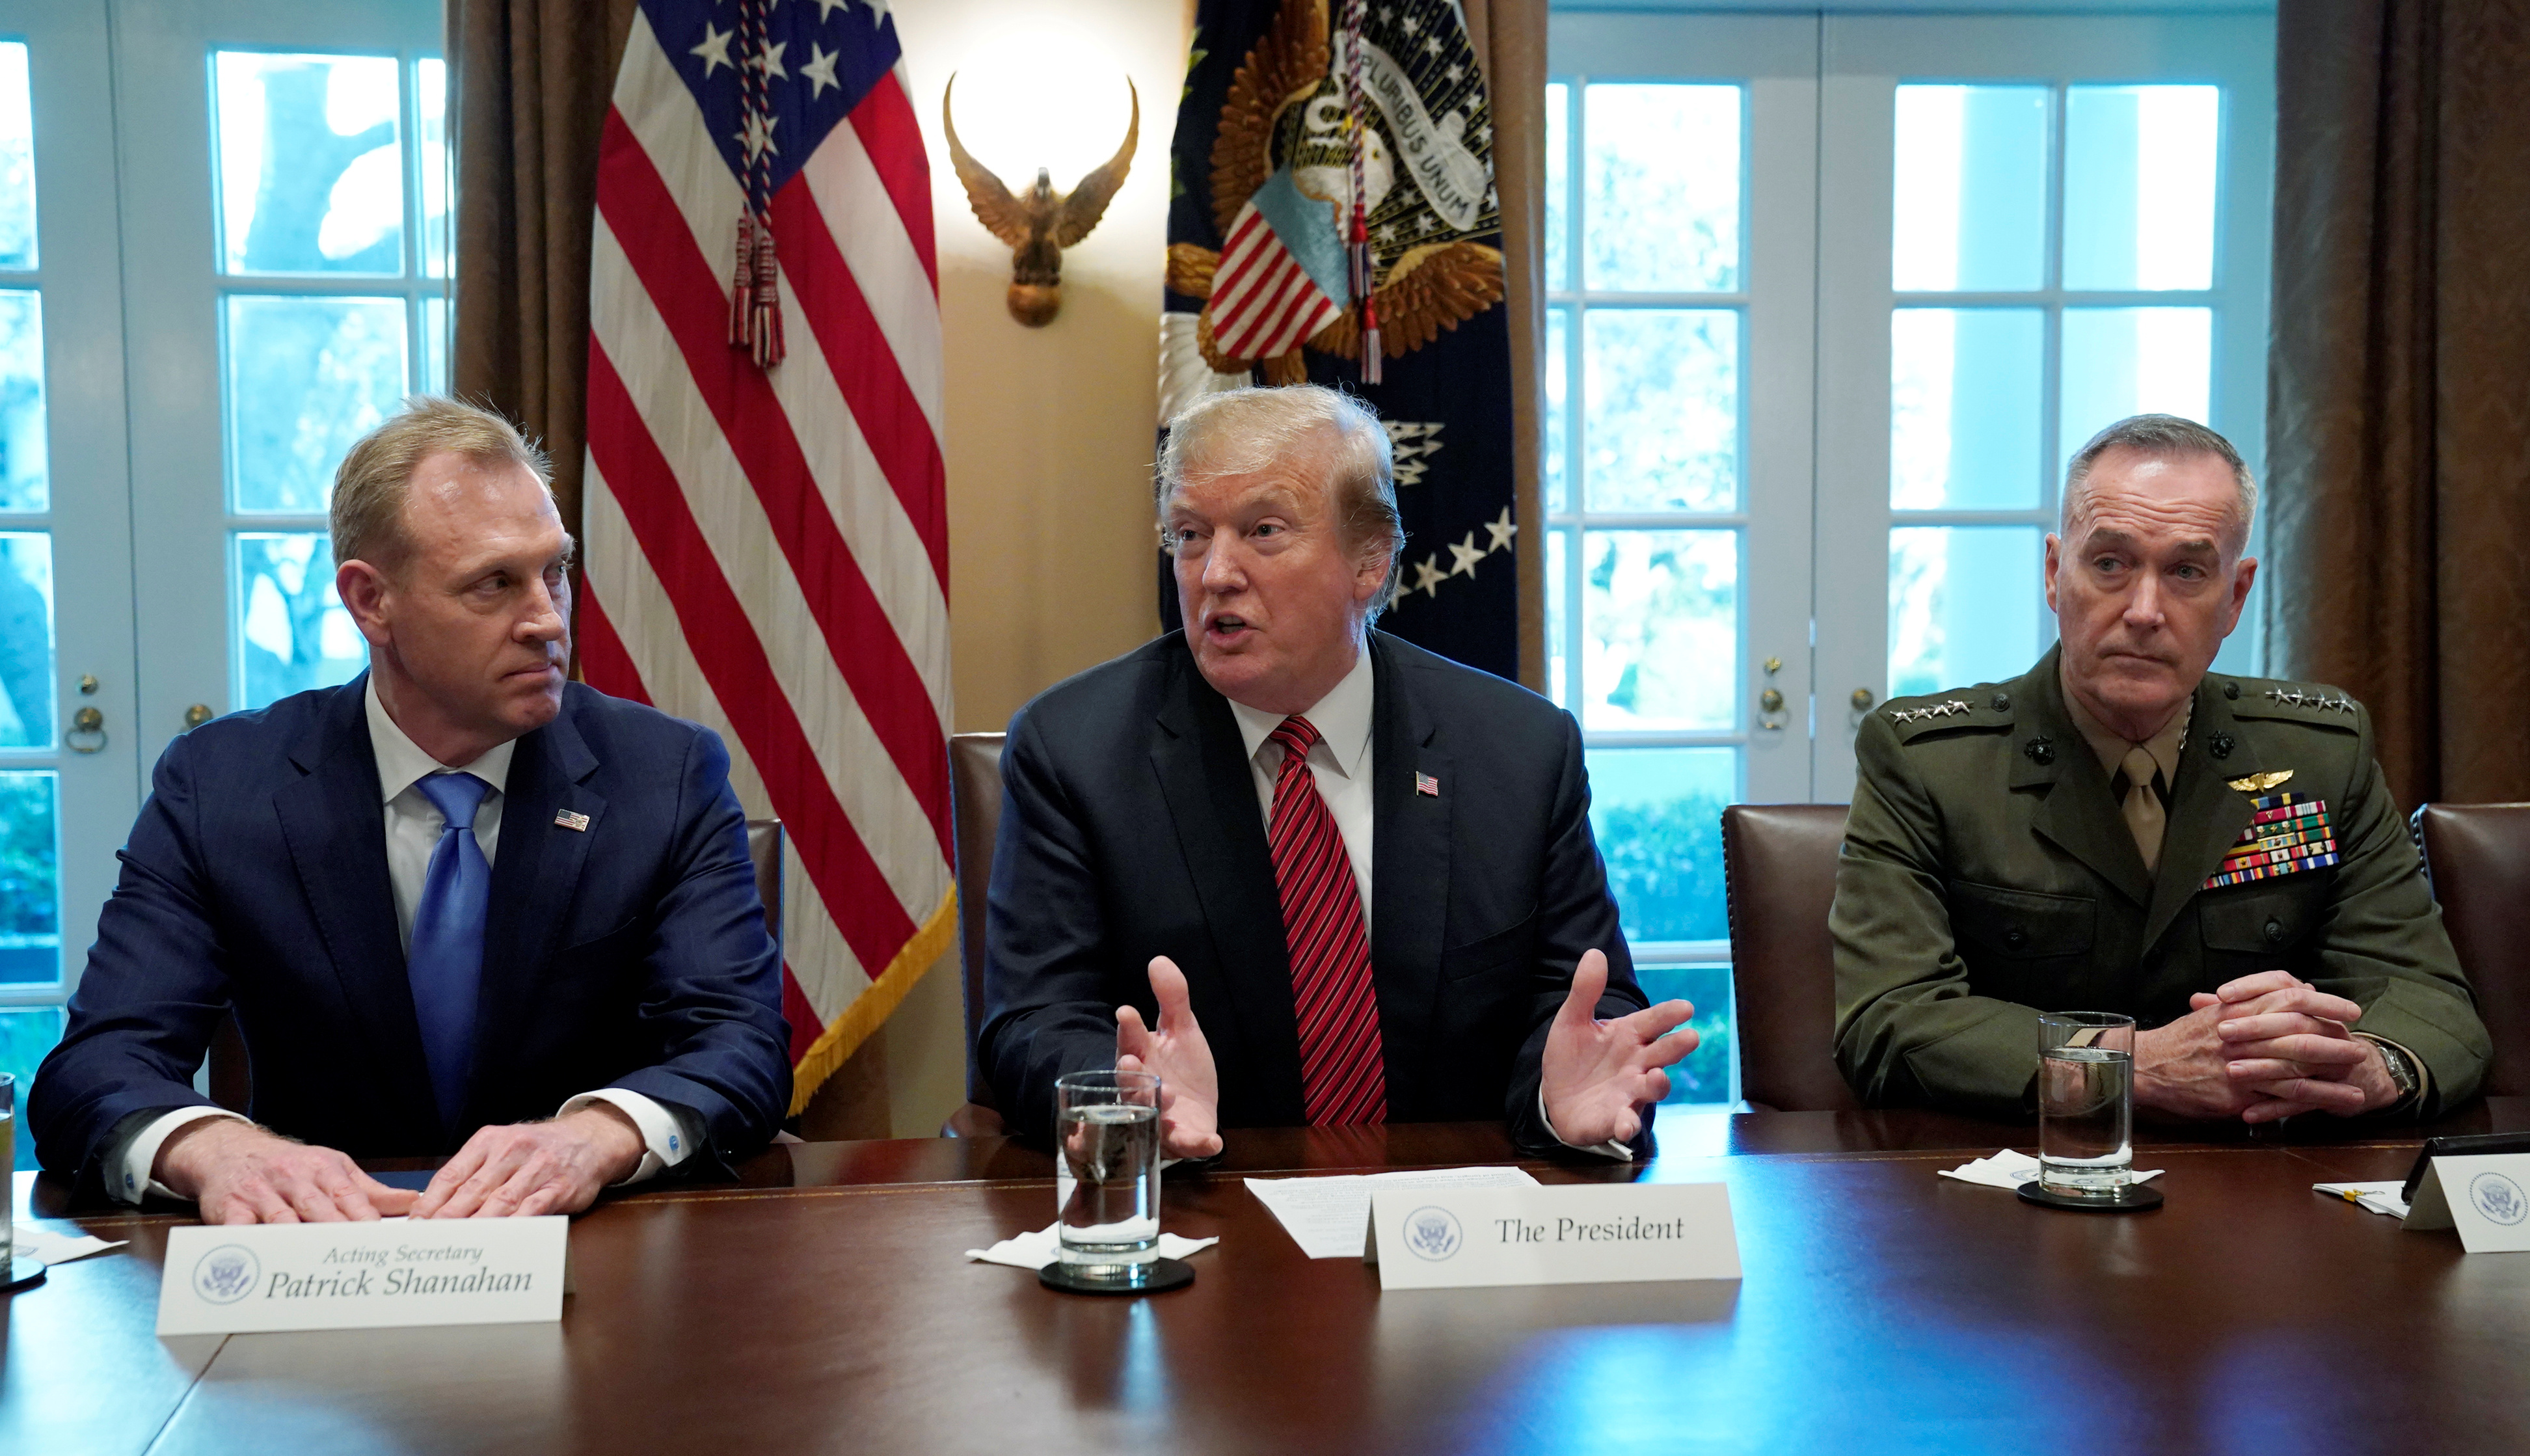 Acting Defense Secretary Patrick Shanahan (L) and Chairman of the Joint Chiefs of Staff Gen. Joseph Dunford (R) listen as U.S. President Donald Trump holds a meeting with senior military leaders at the White House in Washington, U.S., April 3, 2019. REUTERS/Kevin Lamarque